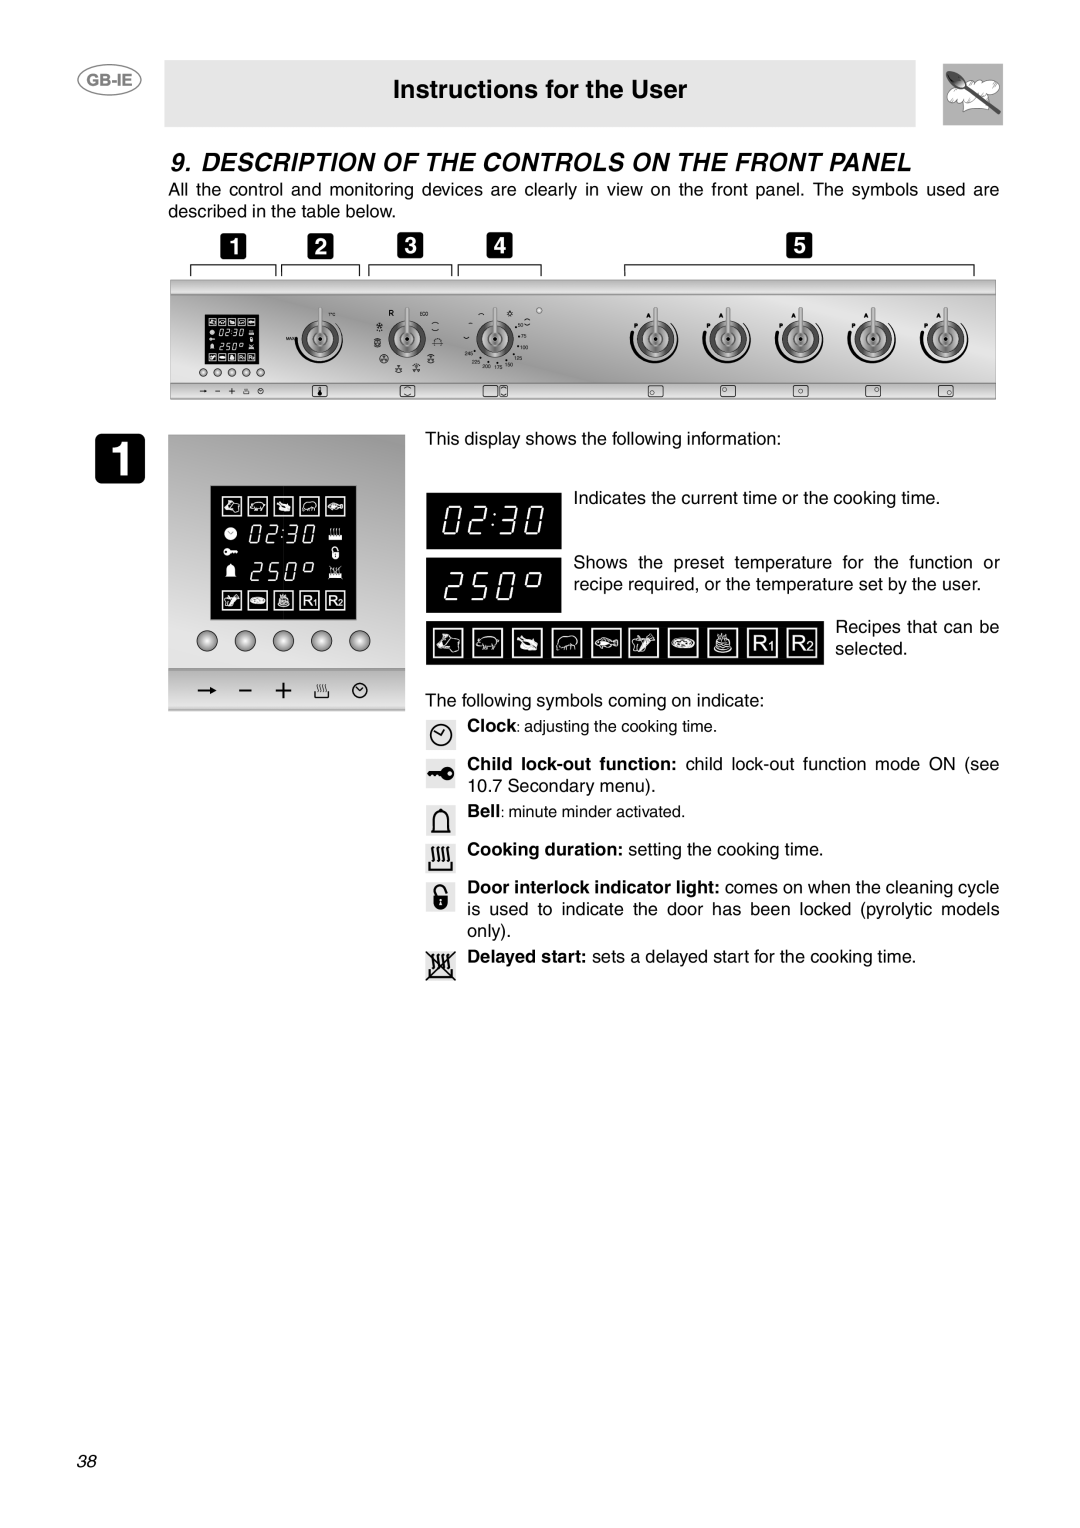 Smeg CE92IMX manual Description Of The Controls On The Front Panel, Instructions for the User 